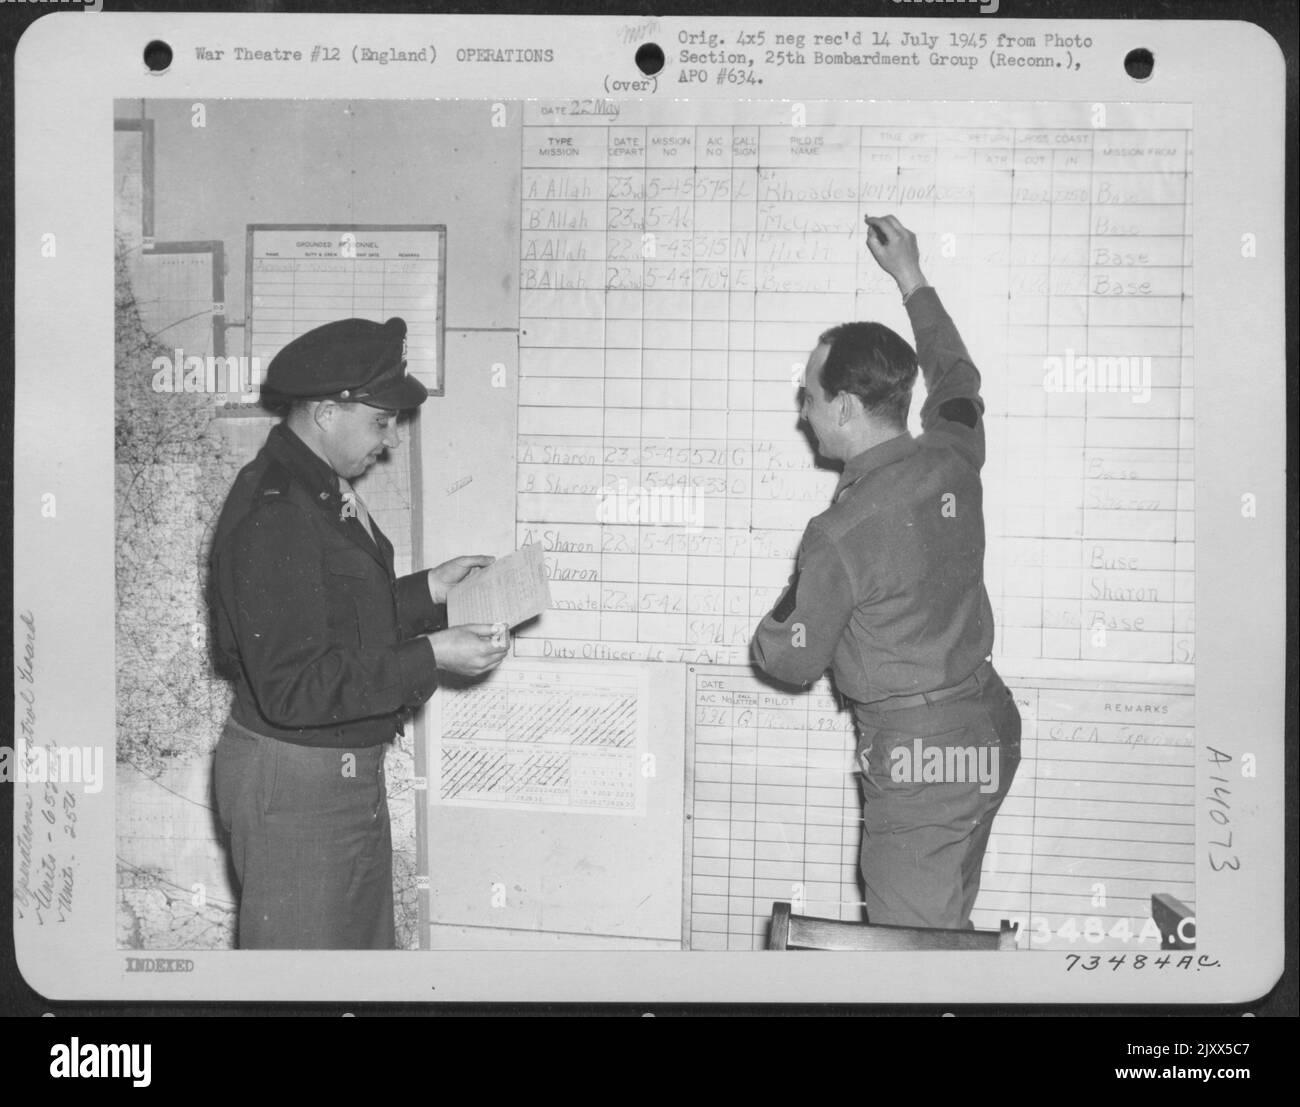 Members Of The 652Nd Weather Reconnaissance Squadron, 25Th Weather Reconnaissance Group, Mark Up Another Mission On The Status Board. England, 23 May 1945. Stock Photo